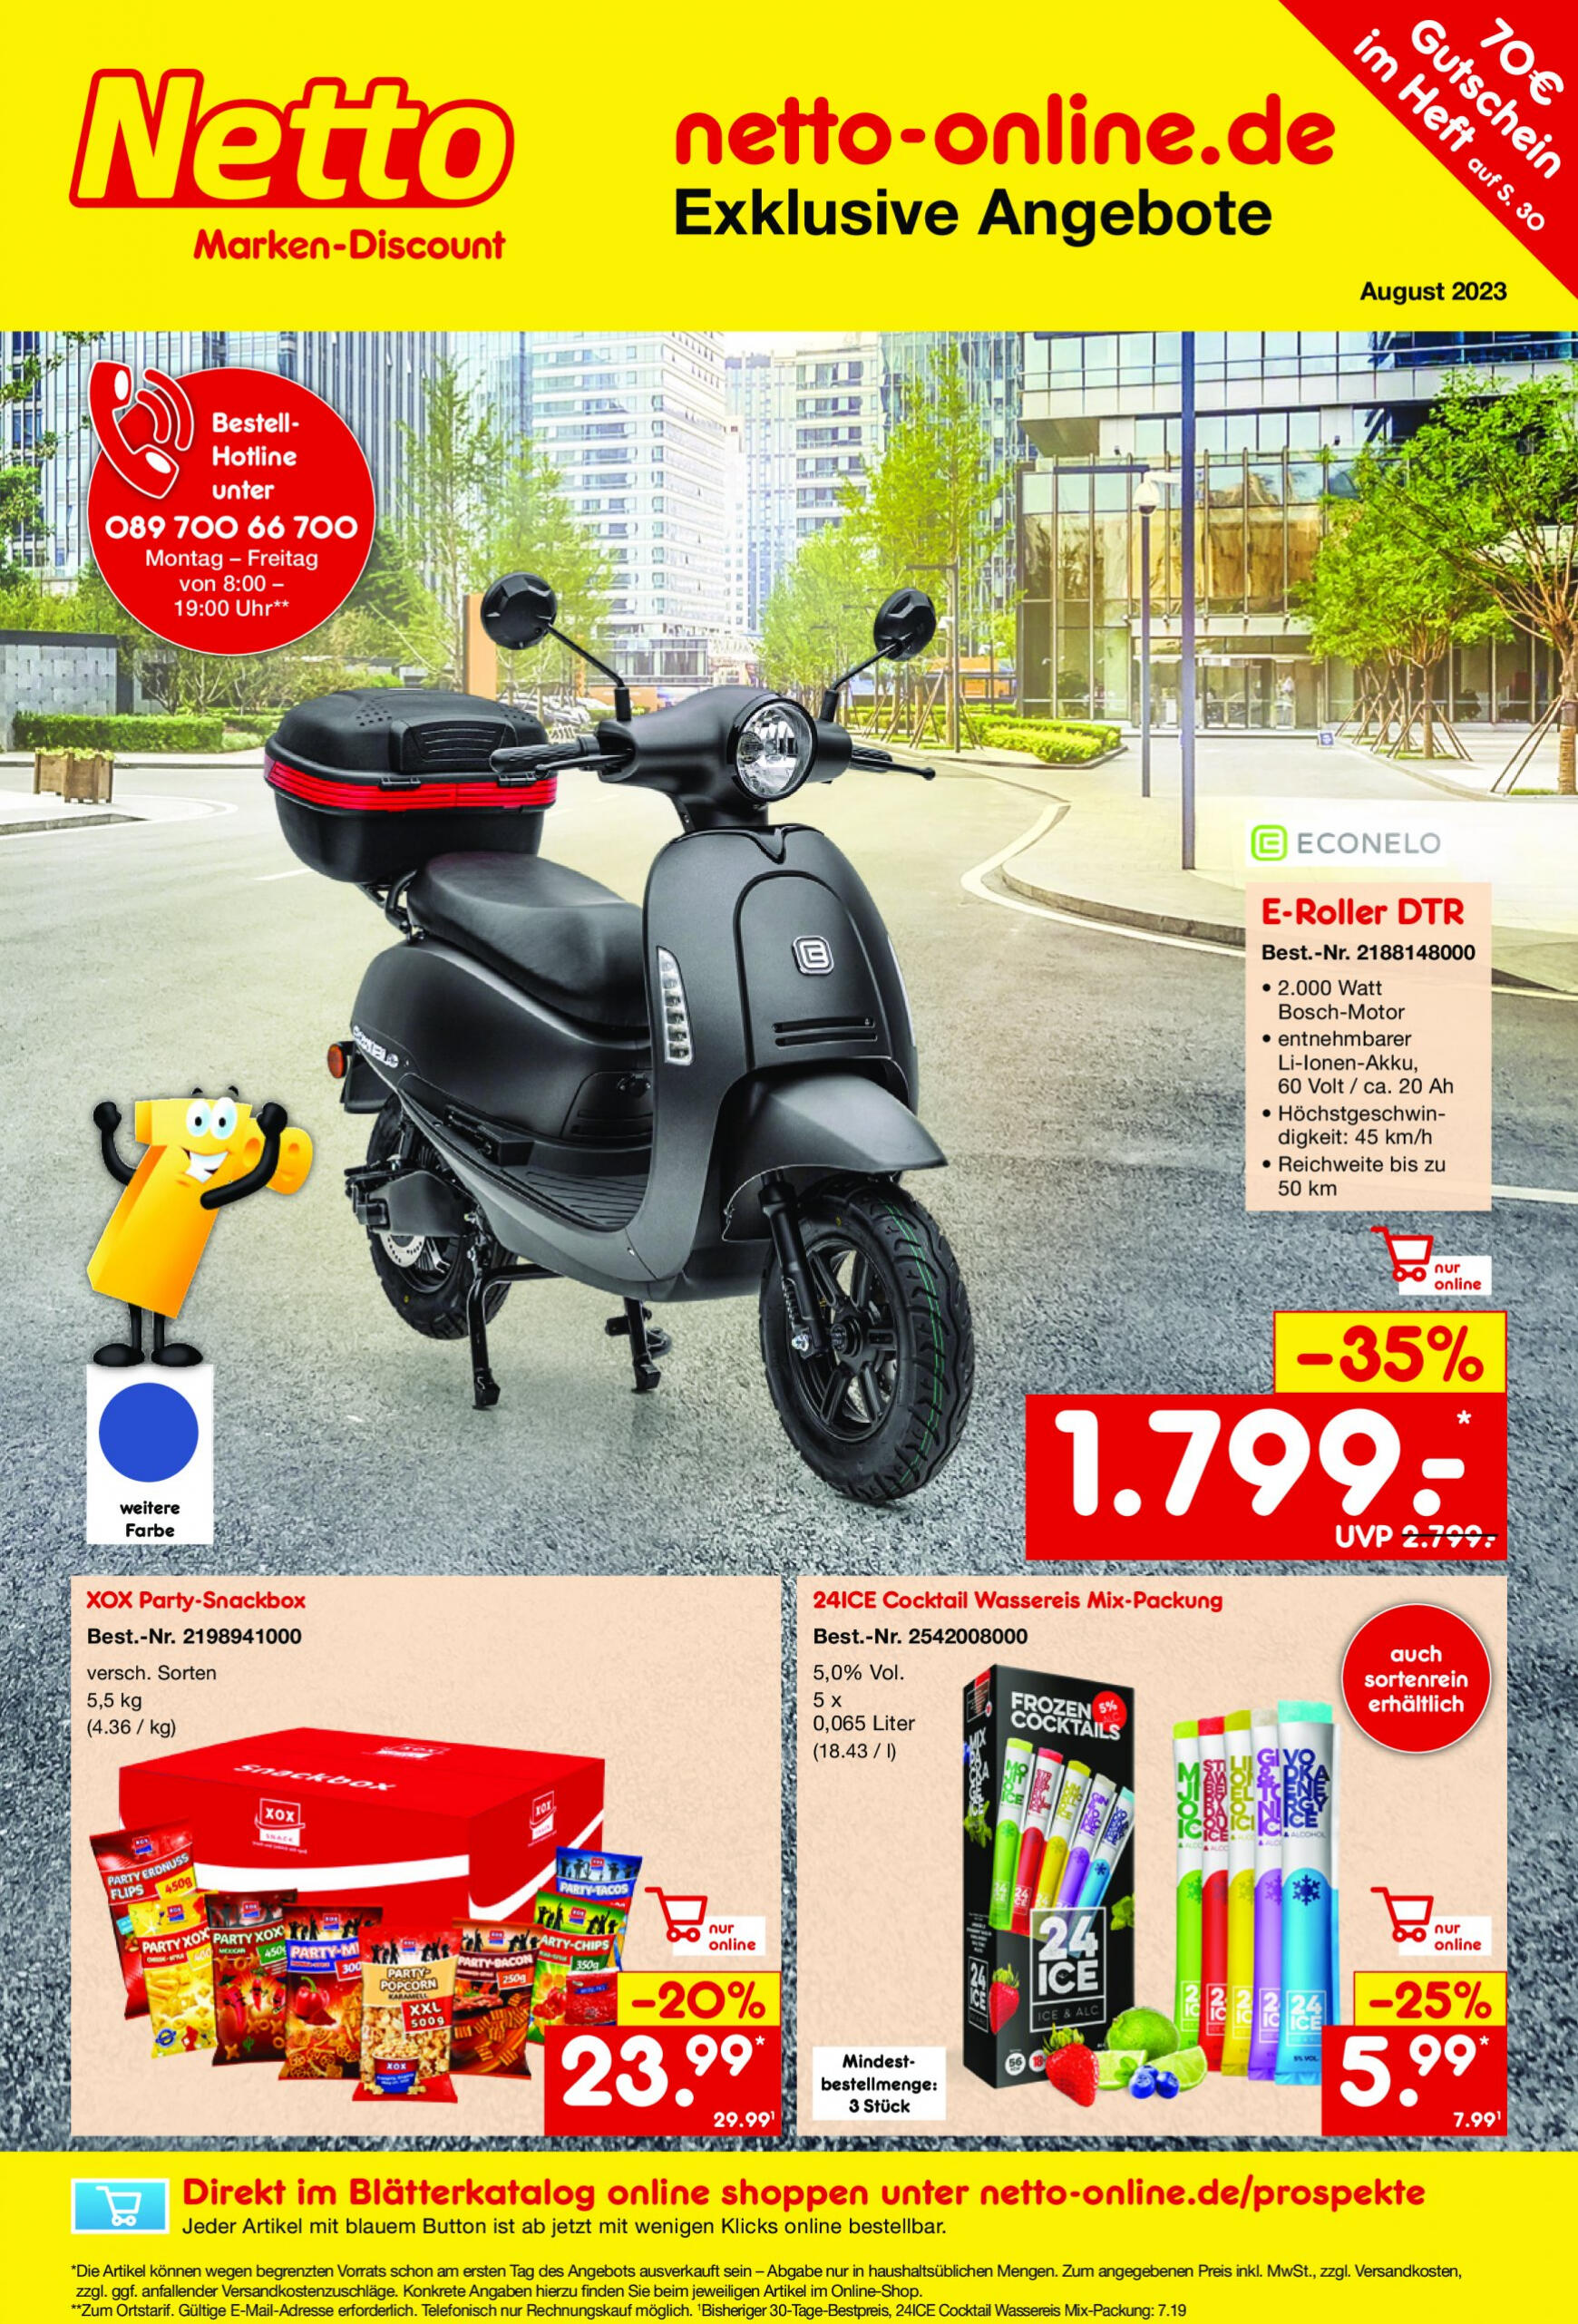 netto - Netto Online-Angebote August - page: 1